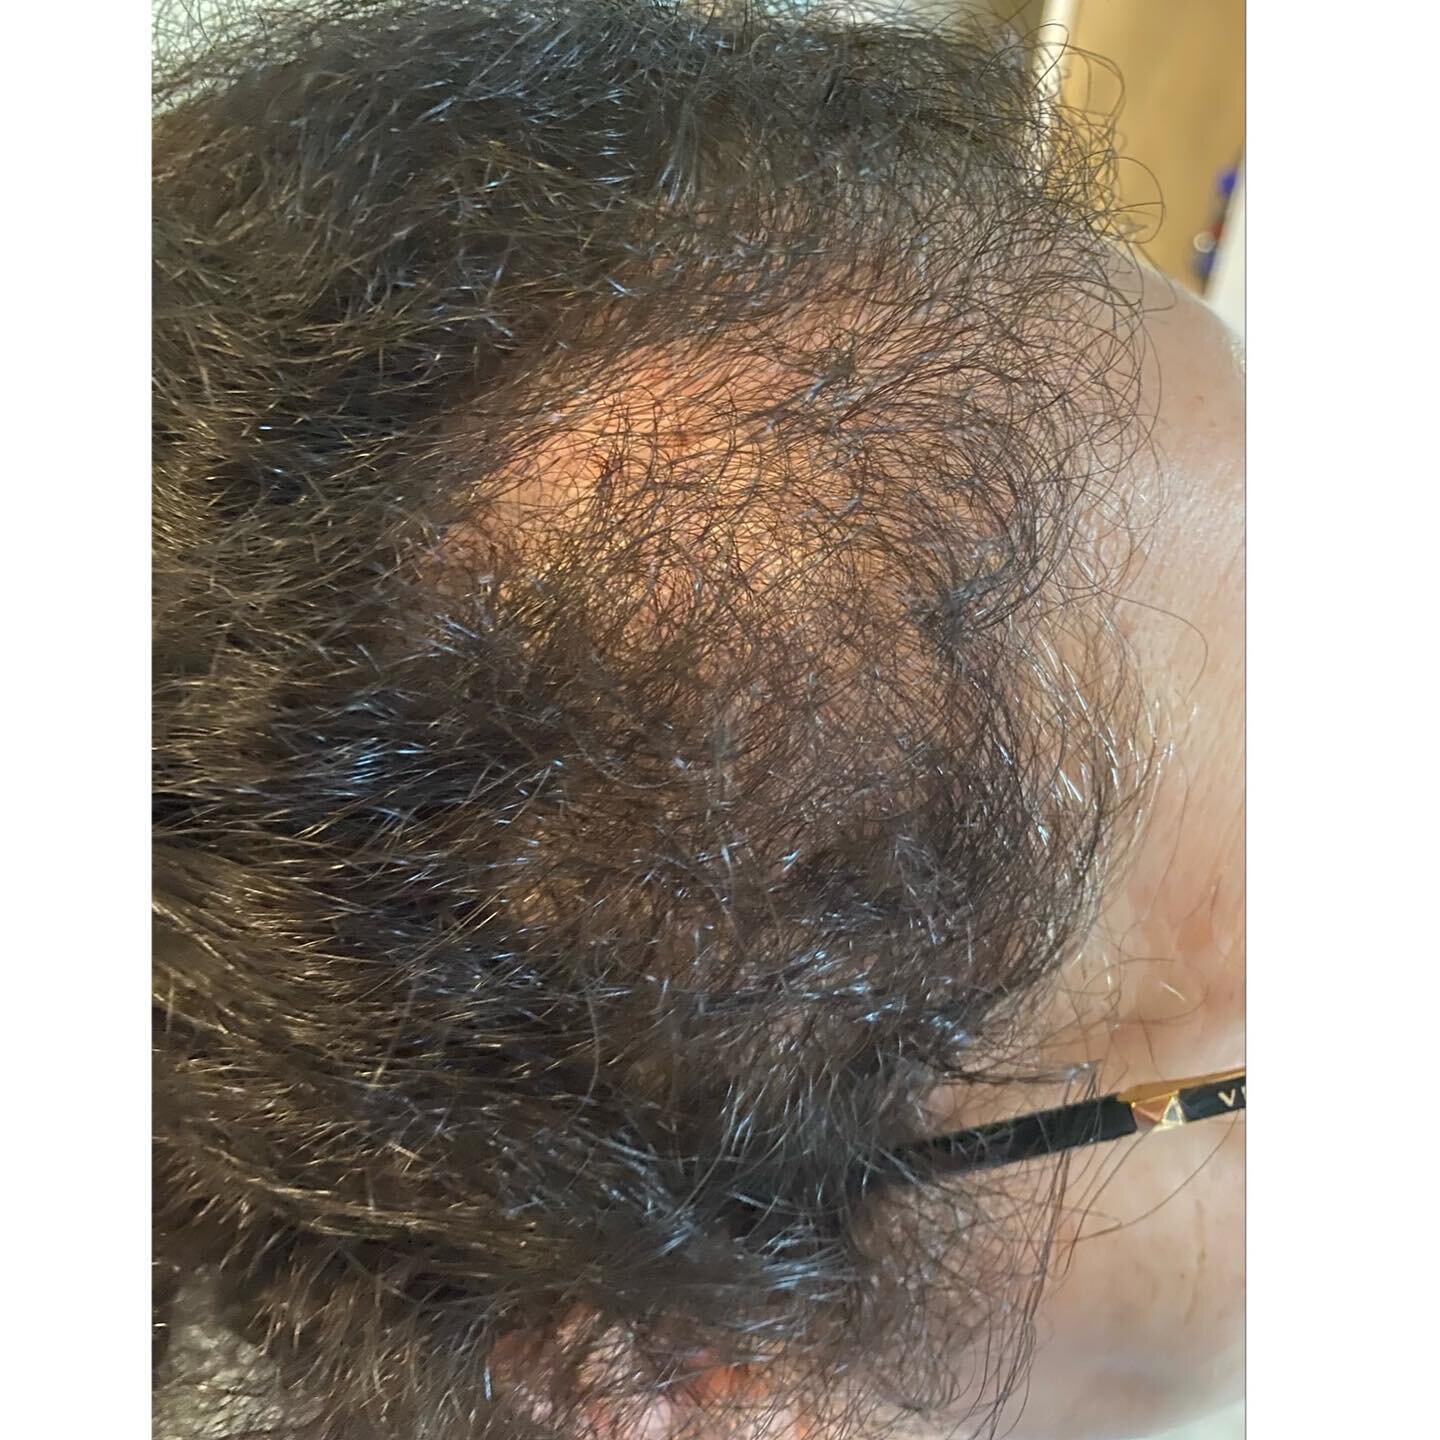 PRP for hair restoration! This client had three treatments 4 weeks apart and we are planning to do about two more! Take a look at her before and after pictures! #goodhairday 
.
#gotox #botox #dysport #goodbotox #anniversary #naturalresults #giveaway 